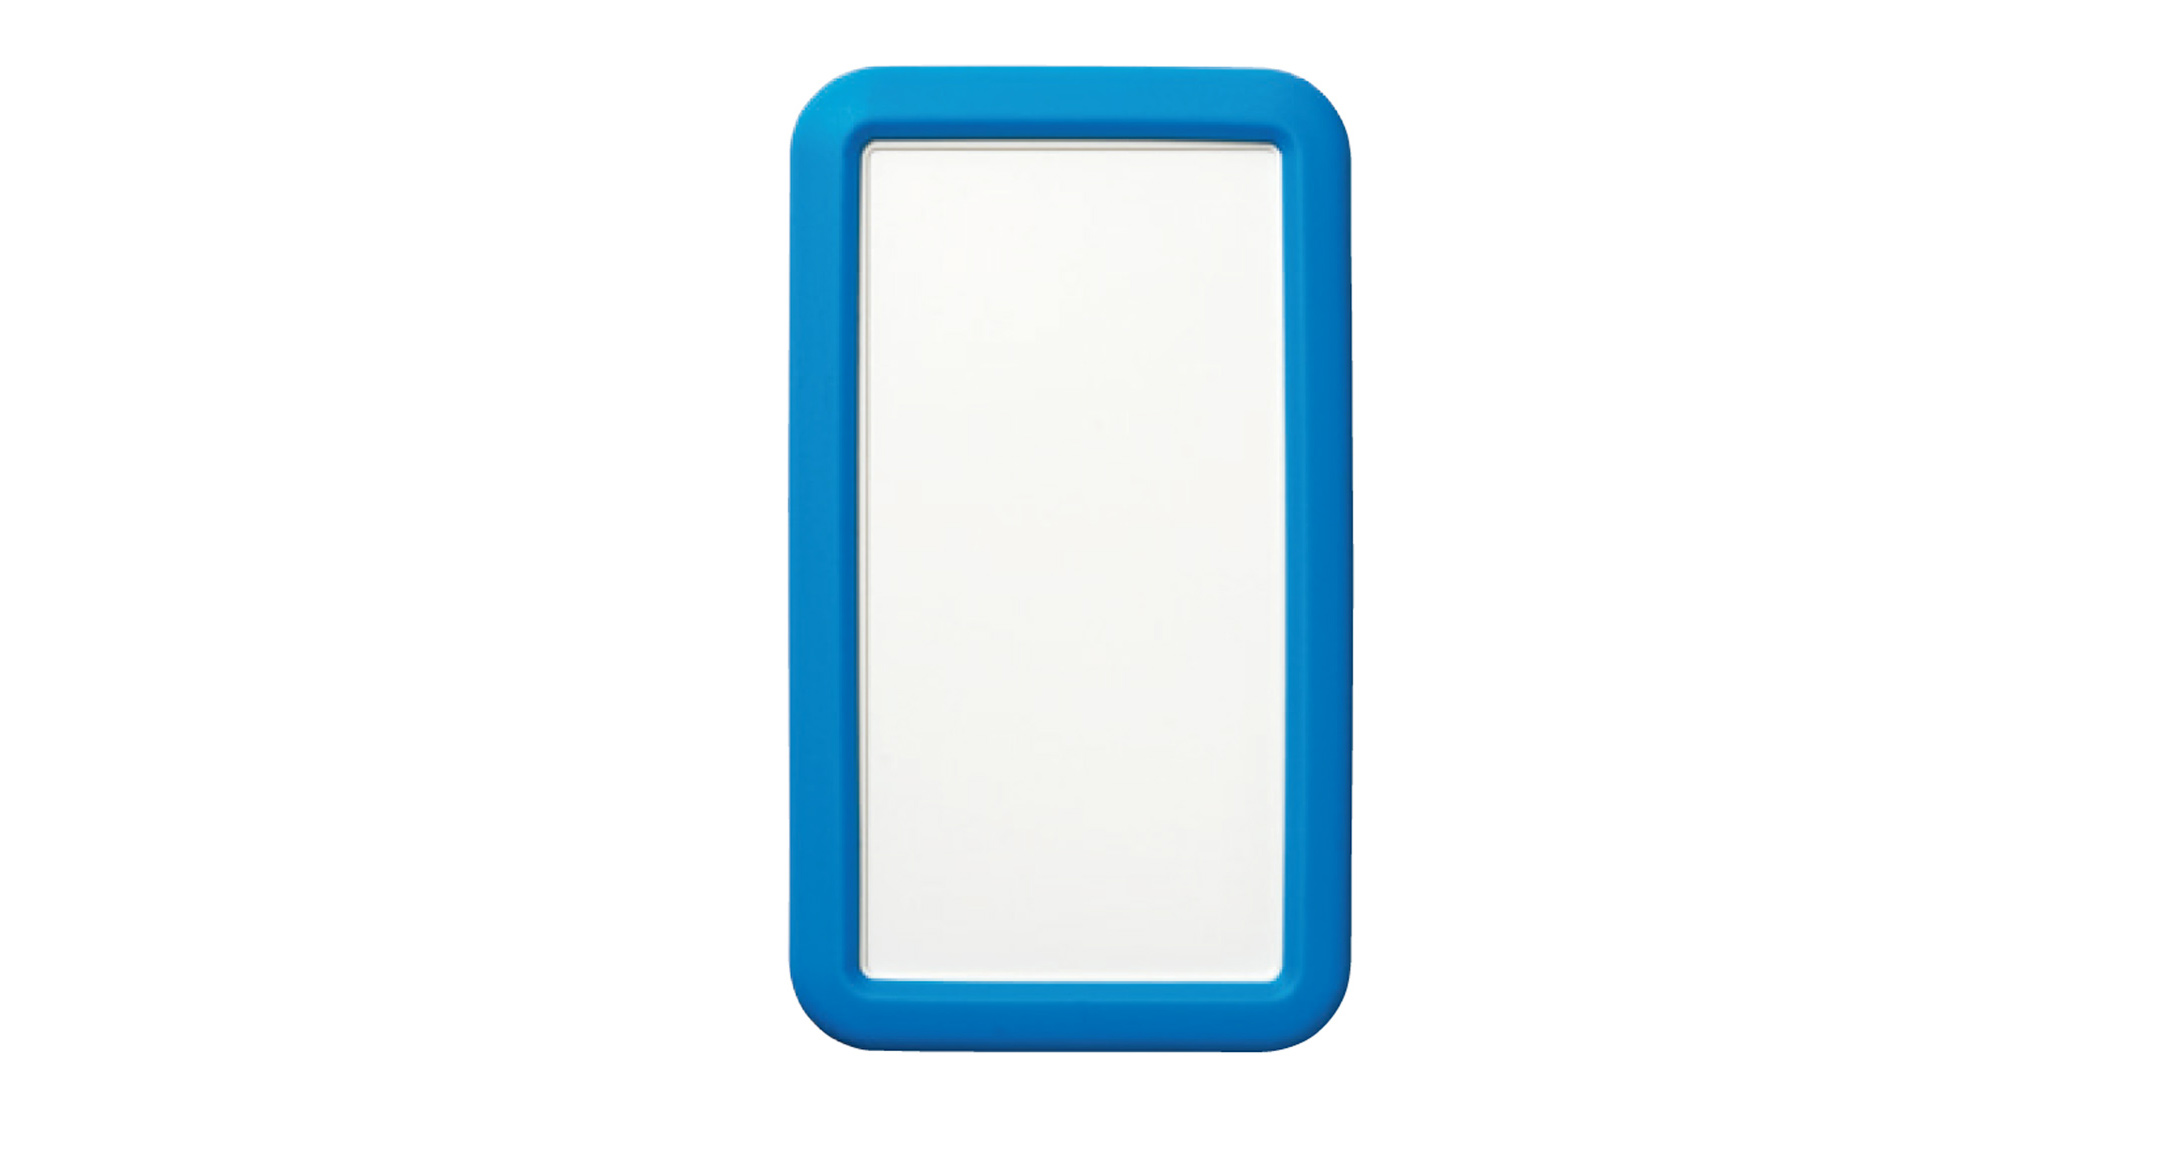 HANDHELD CASE with SILICONE COVER - LCS series:Off-white/Blue